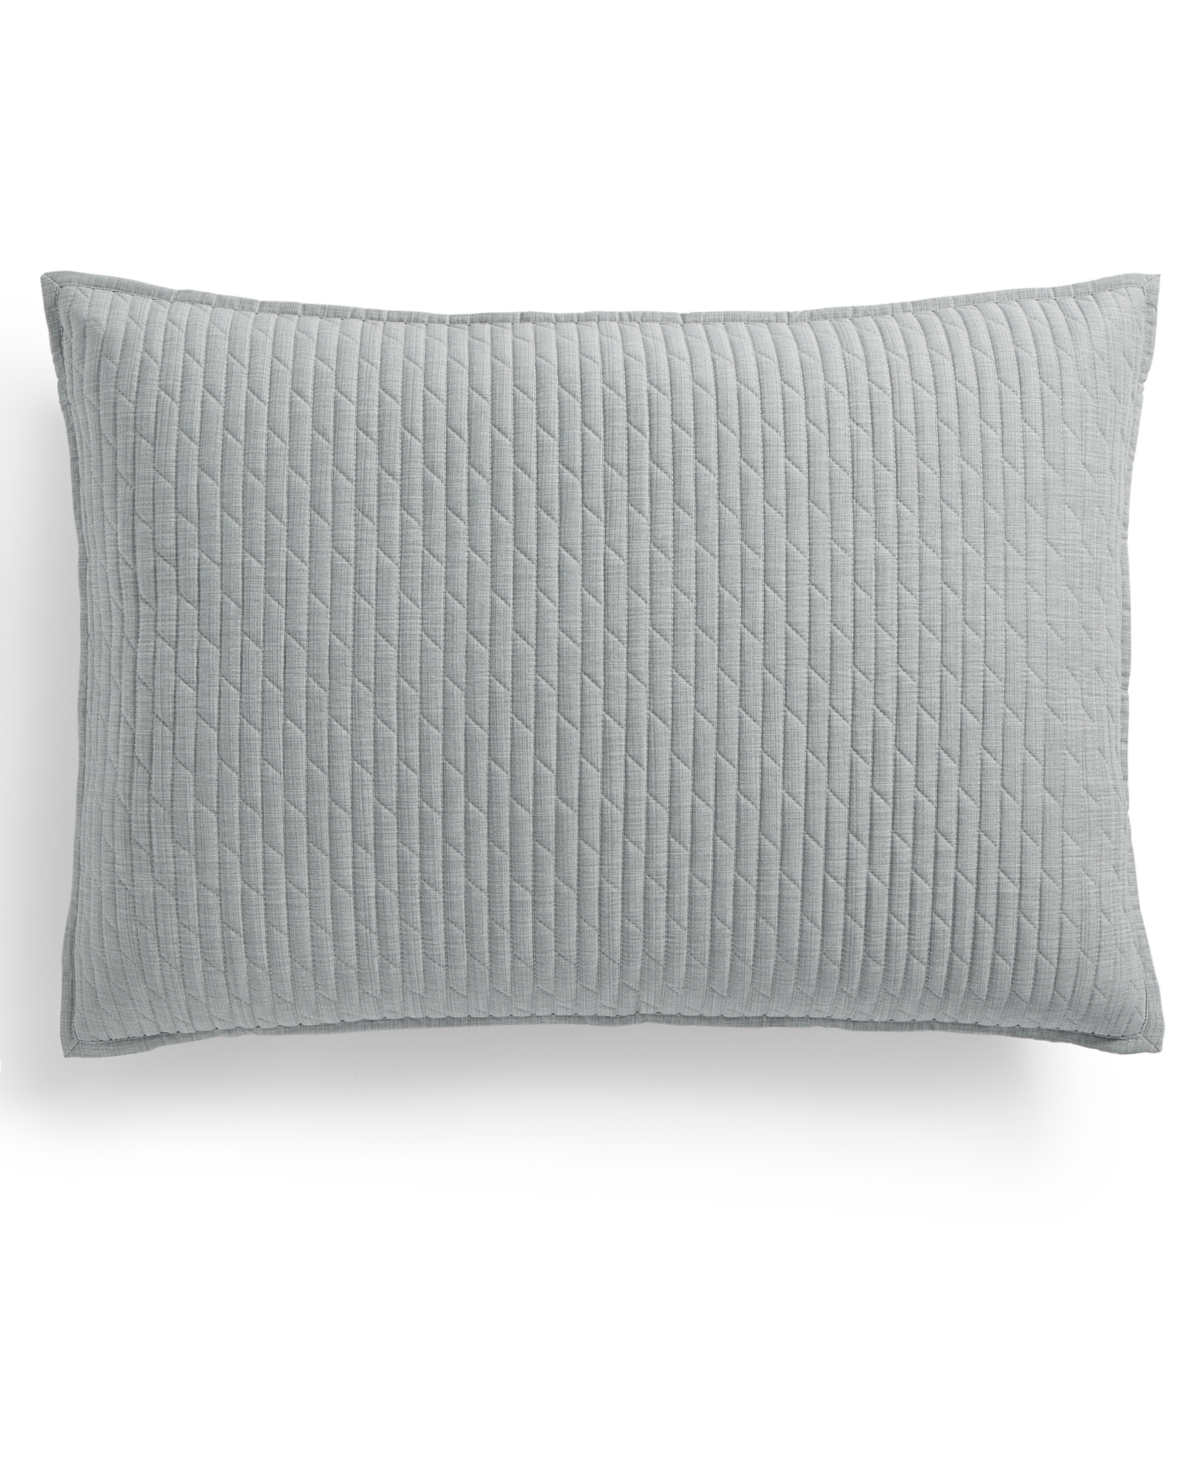 Bedford Geo Quilted Sham, King, Created for Macy's - Grey